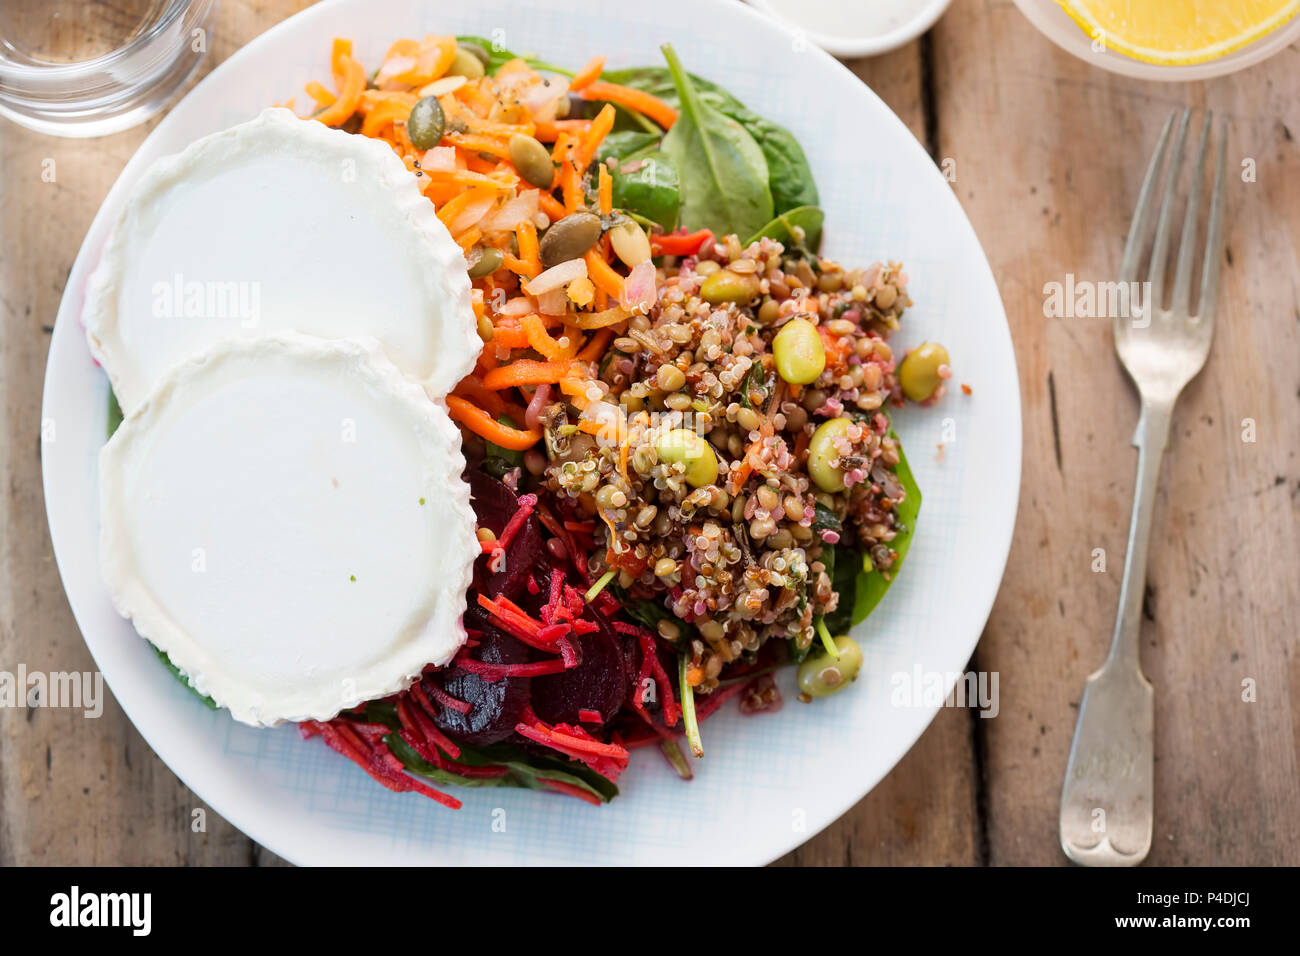 Goats cheese, beetroot, wholegrain, quinoa and edamame, carrot and pumpkin seeds salad with yoghurt dressing Stock Photo